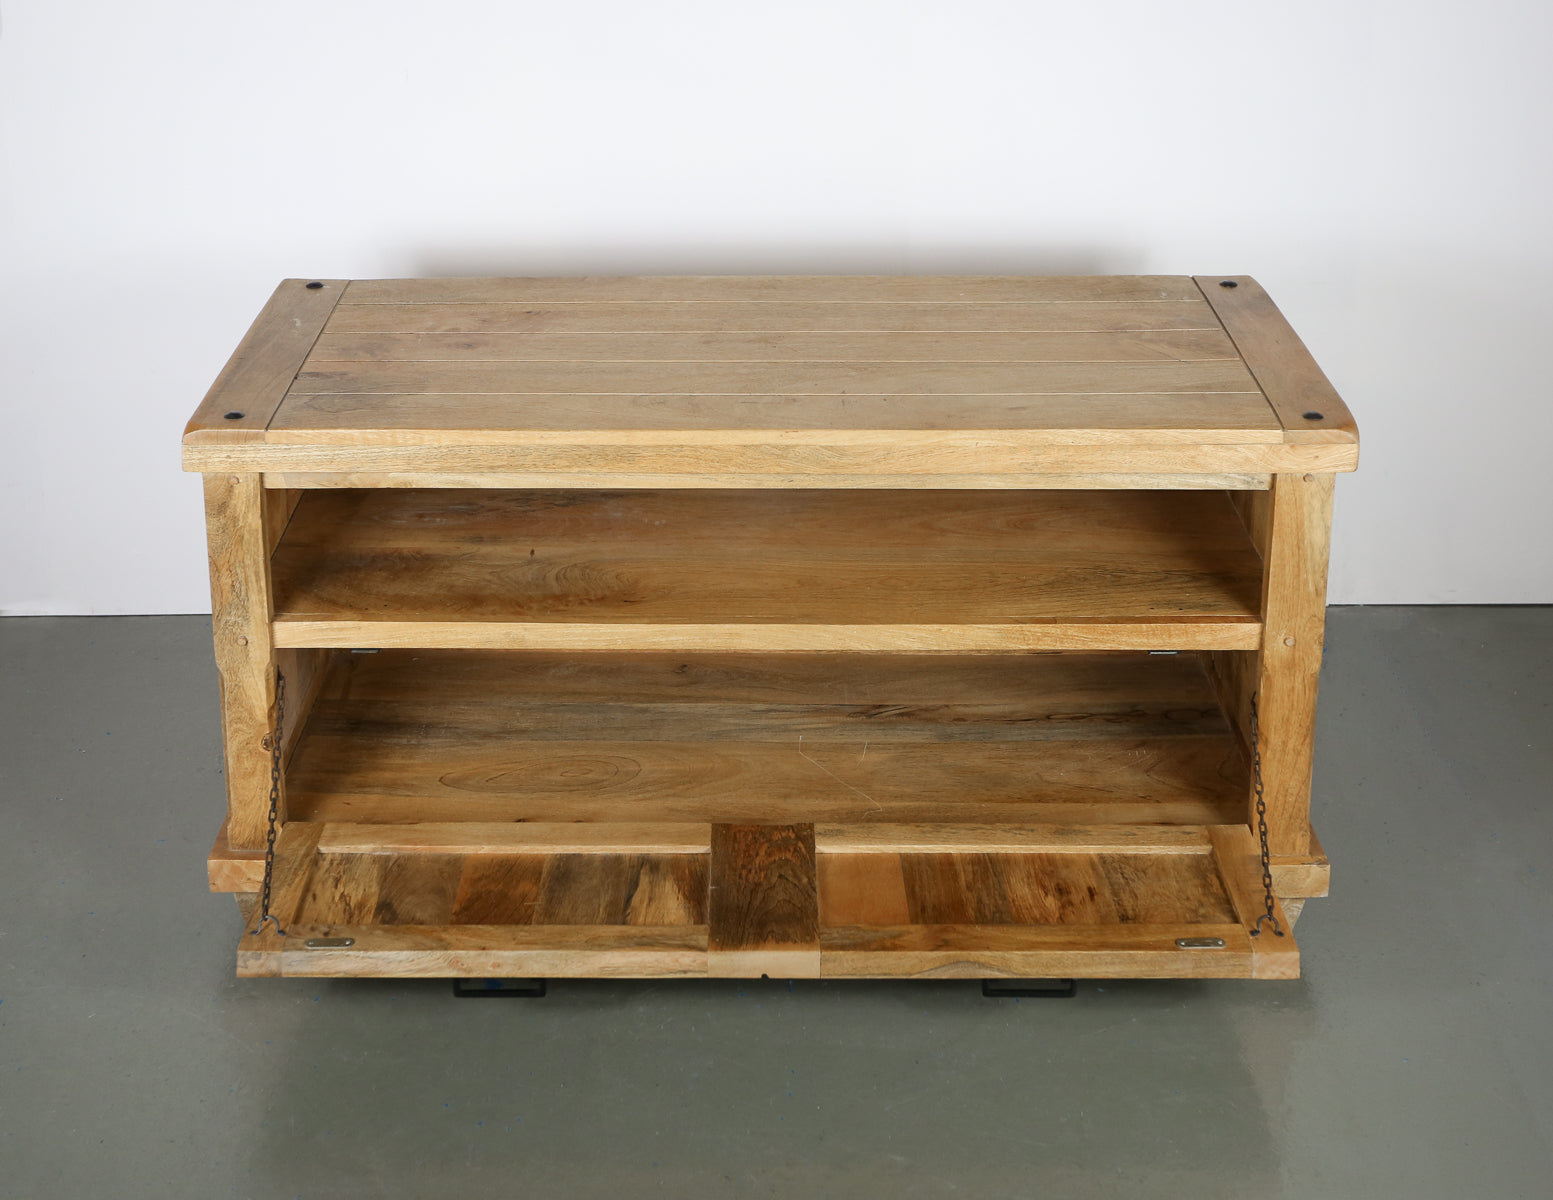 Oak Furniture Land Solid Wood TV Stand (2 units available)